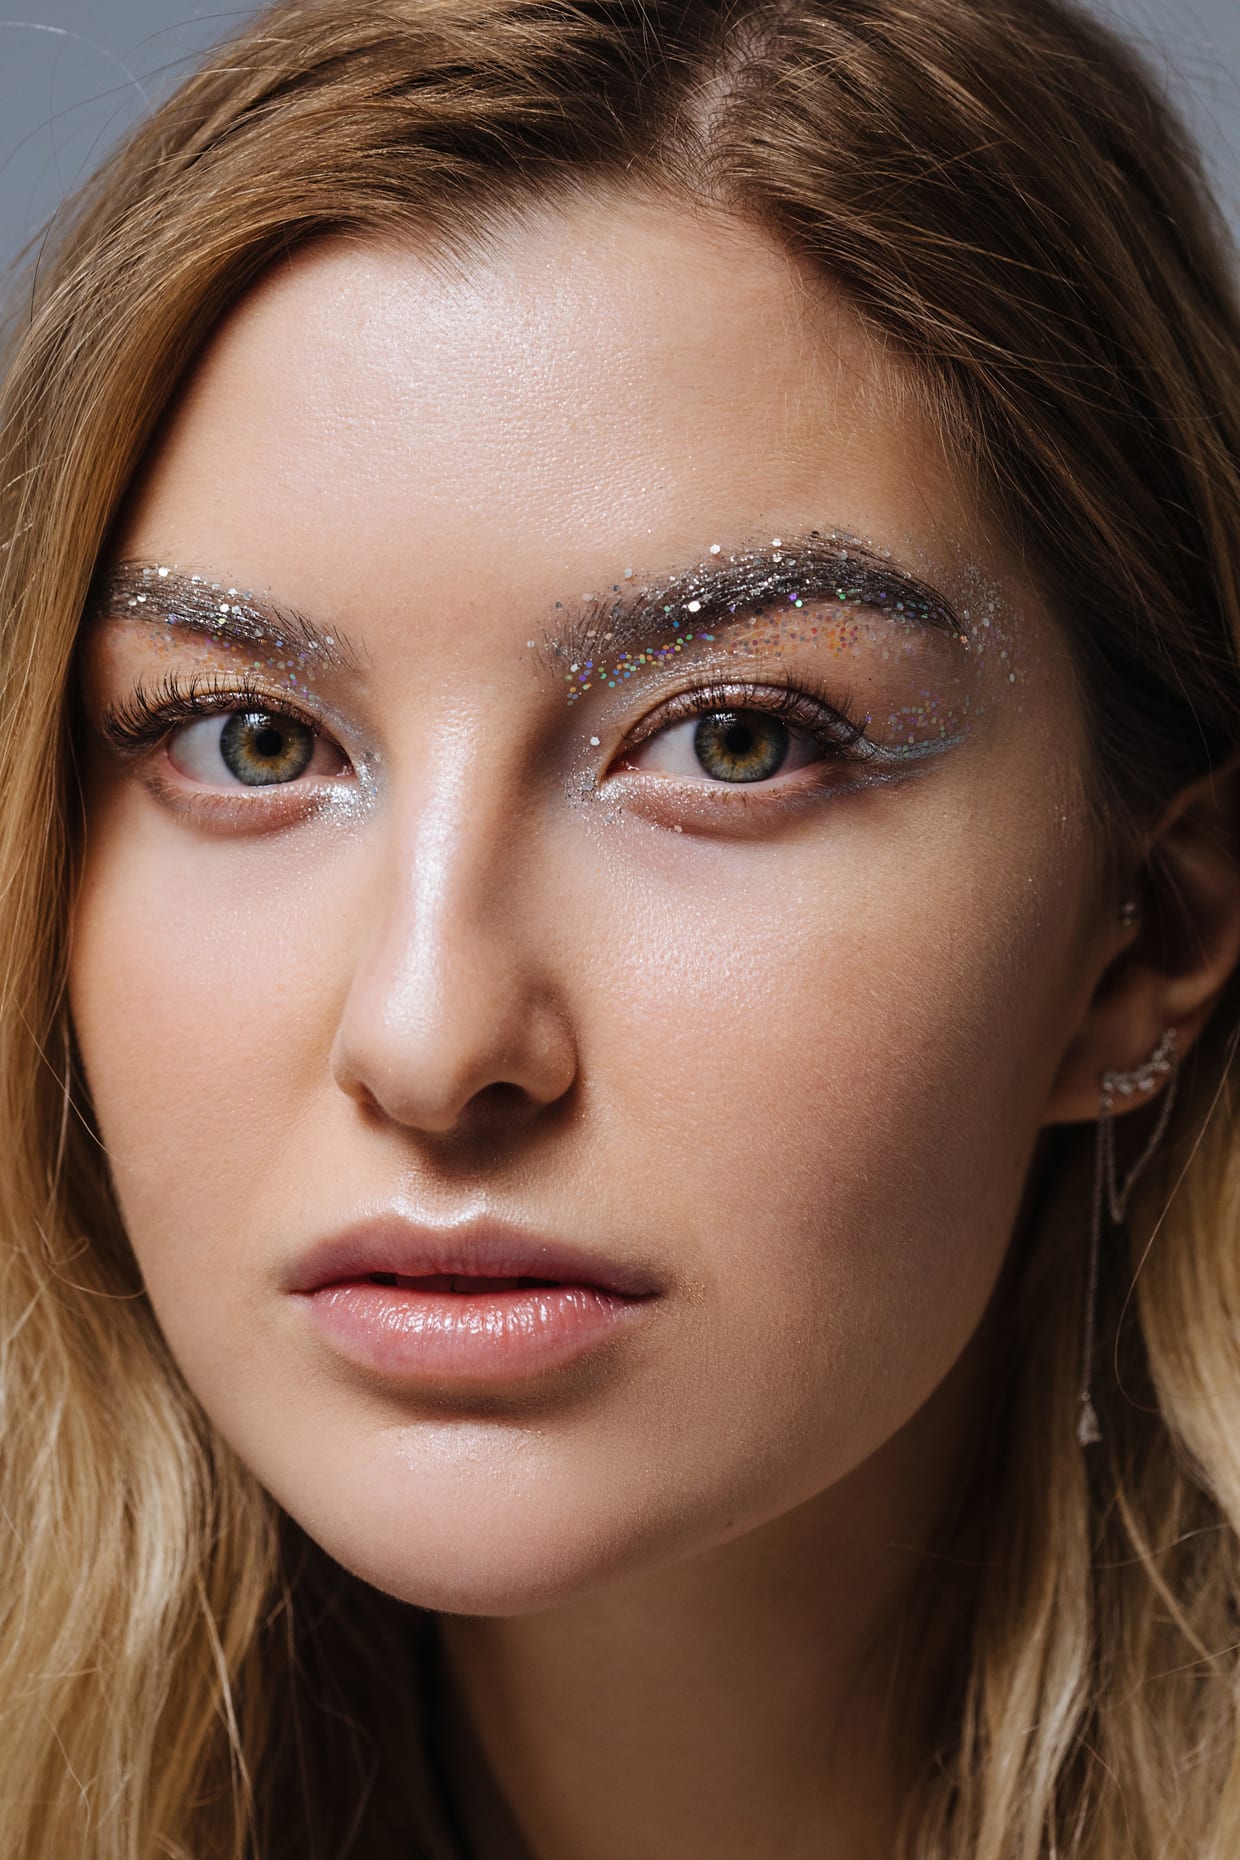 Close-up portrait of a woman with silver glitter on her eyelids and brows.